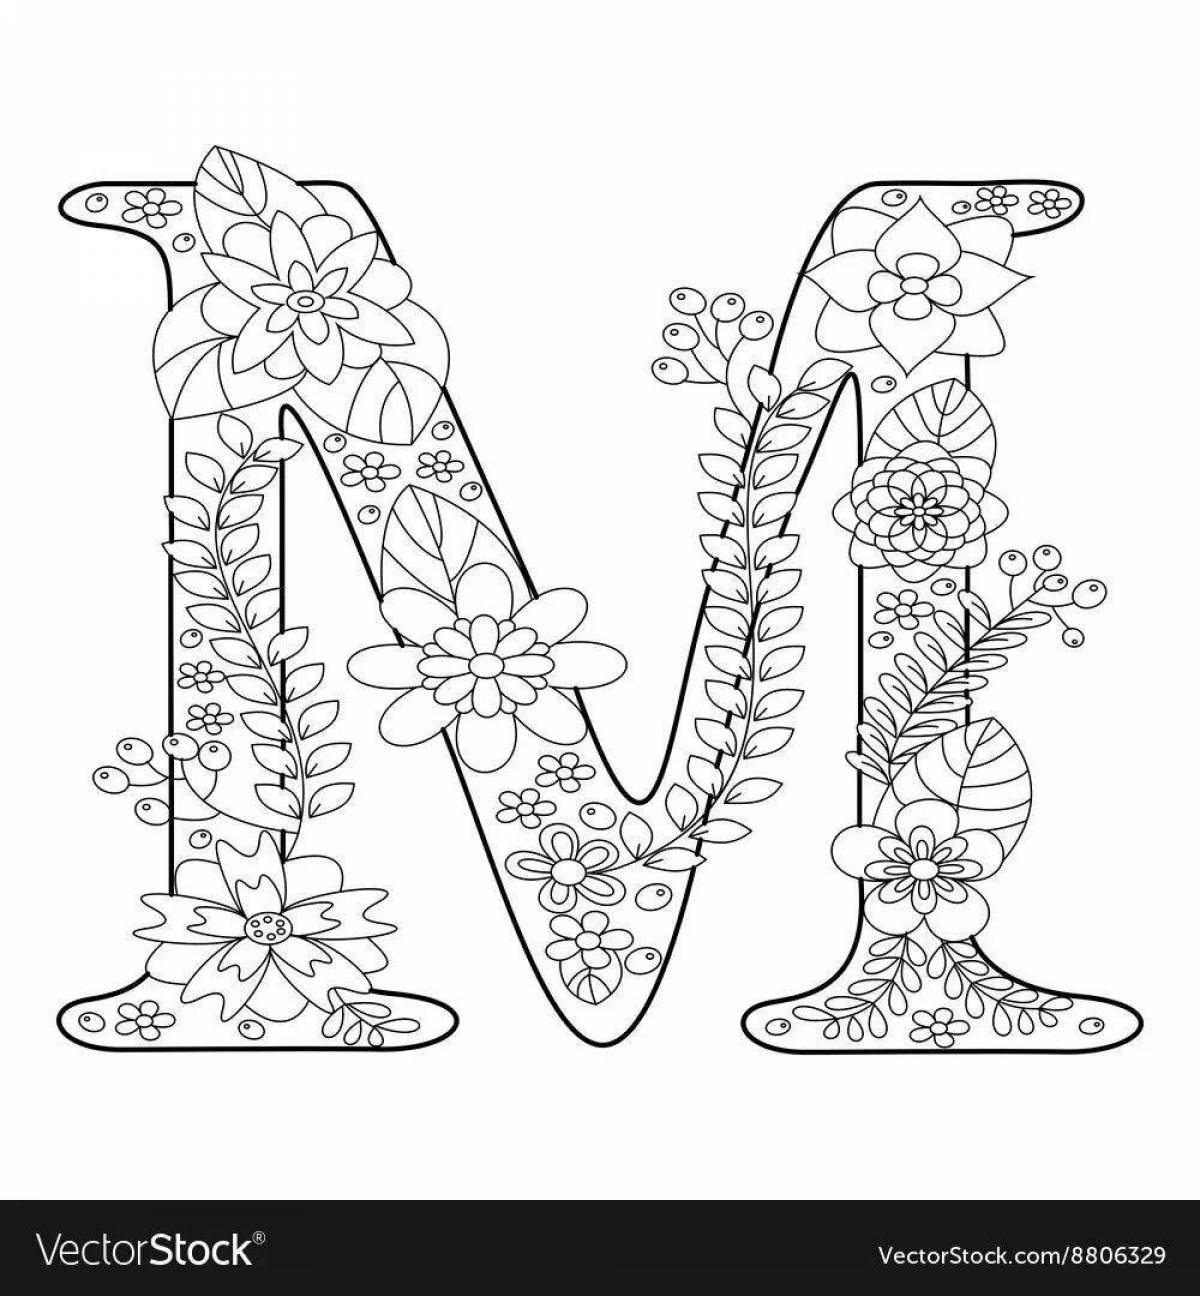 Coloring page sweet letter m